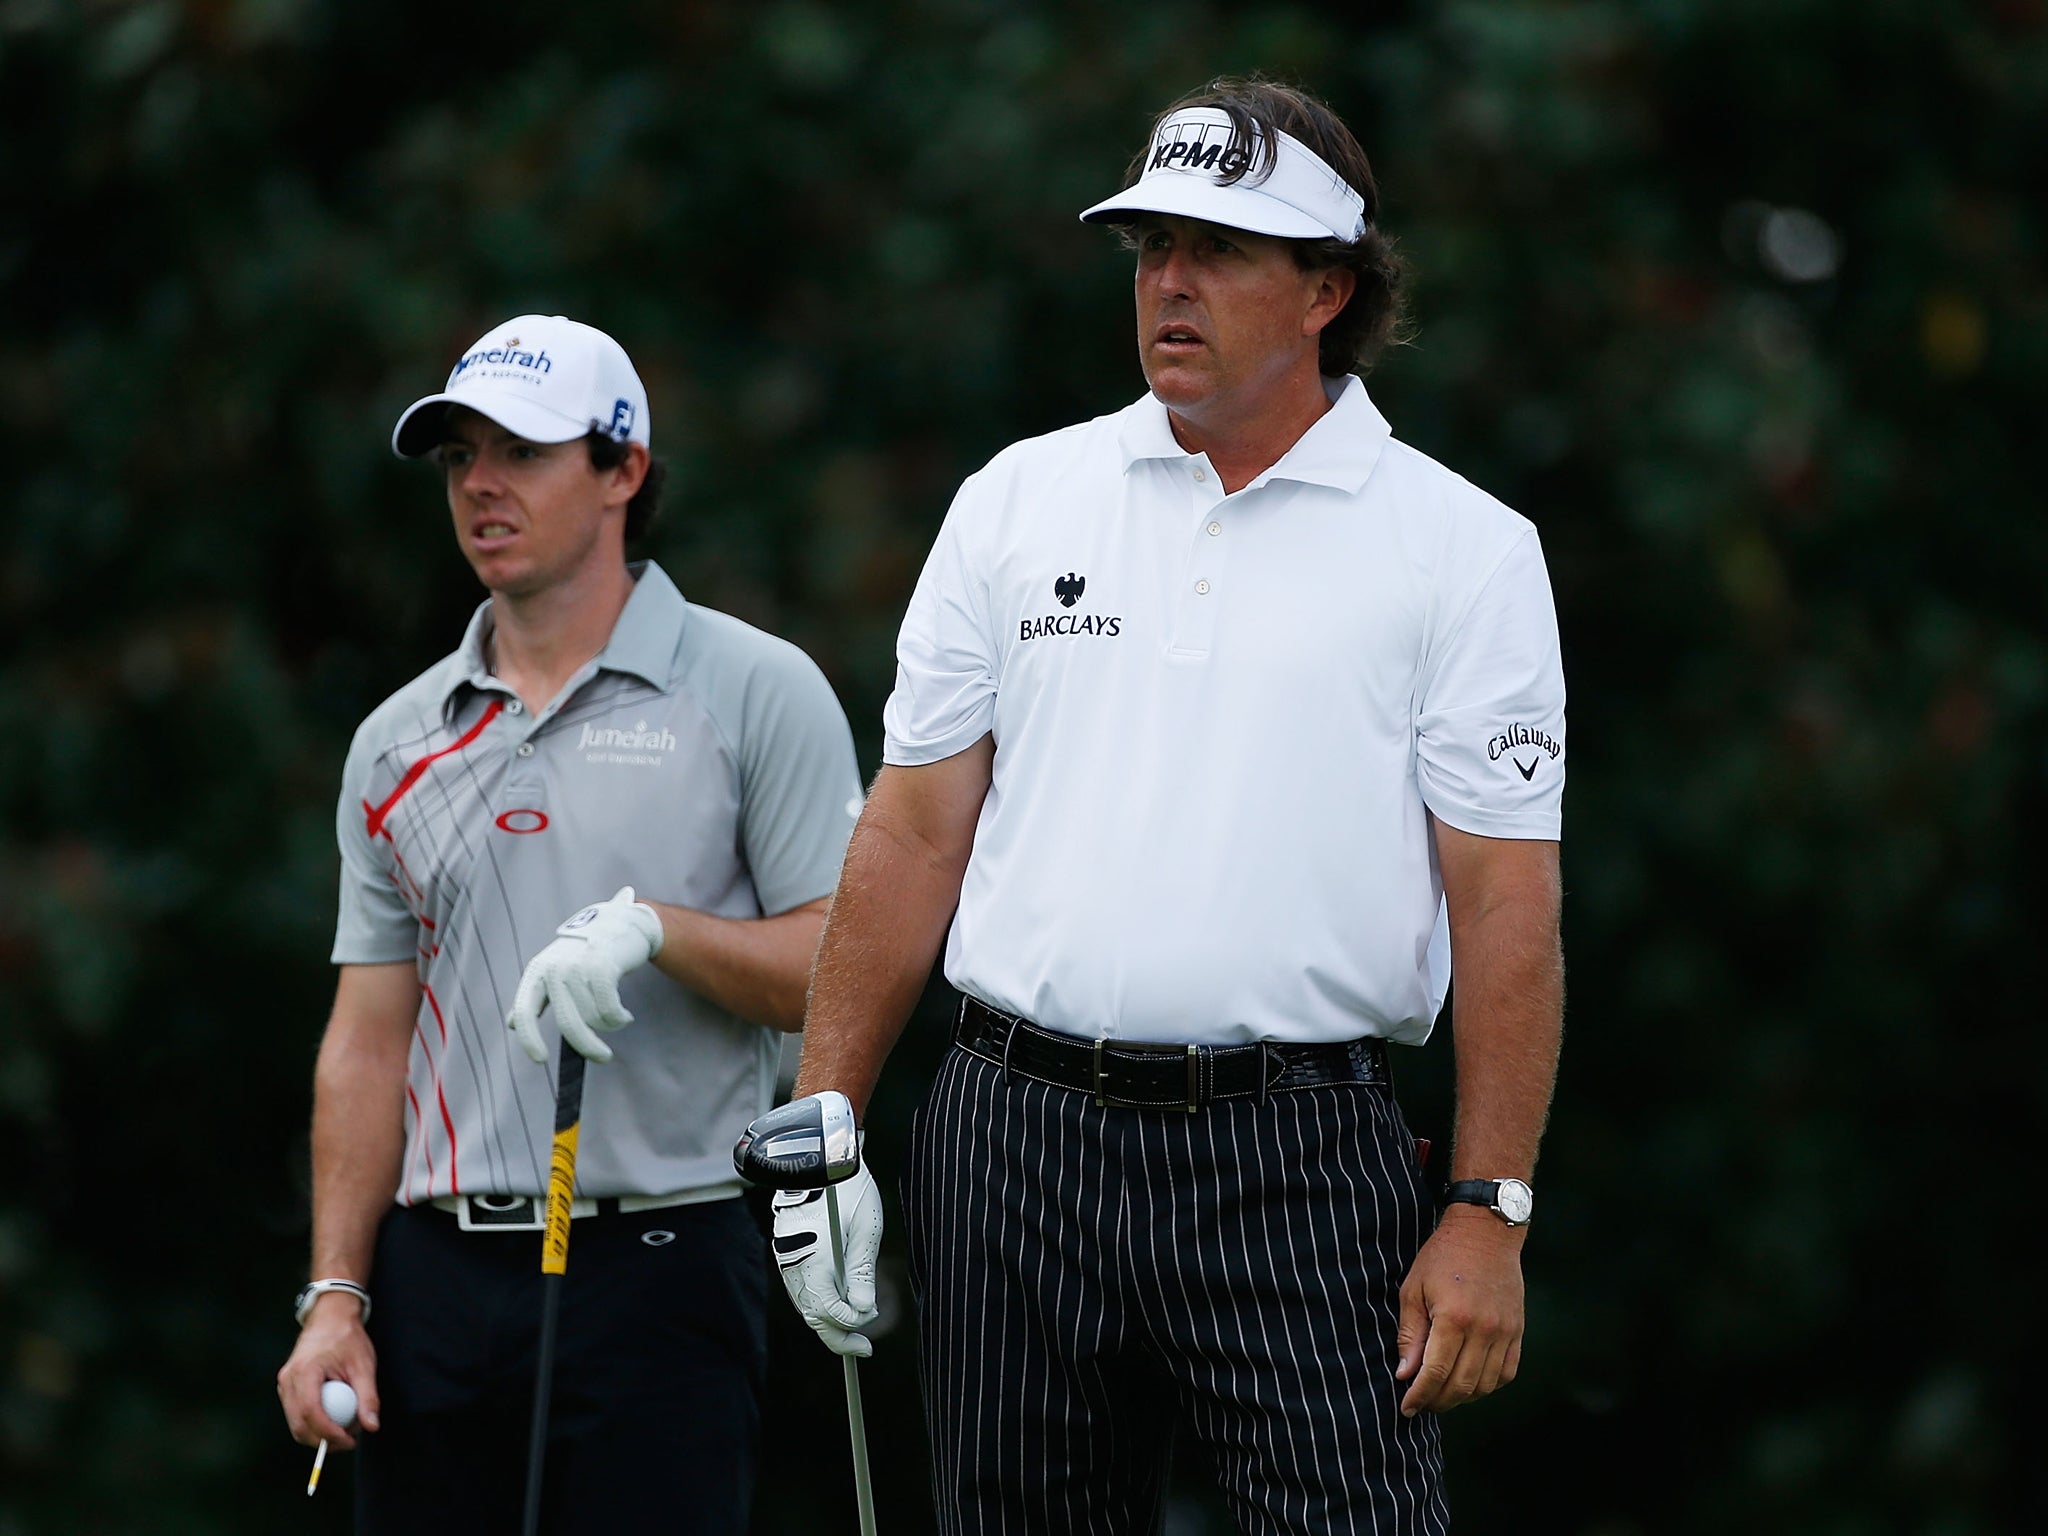 Rory McIlroy will play alongside Phil Mickelson at the 2013 Open